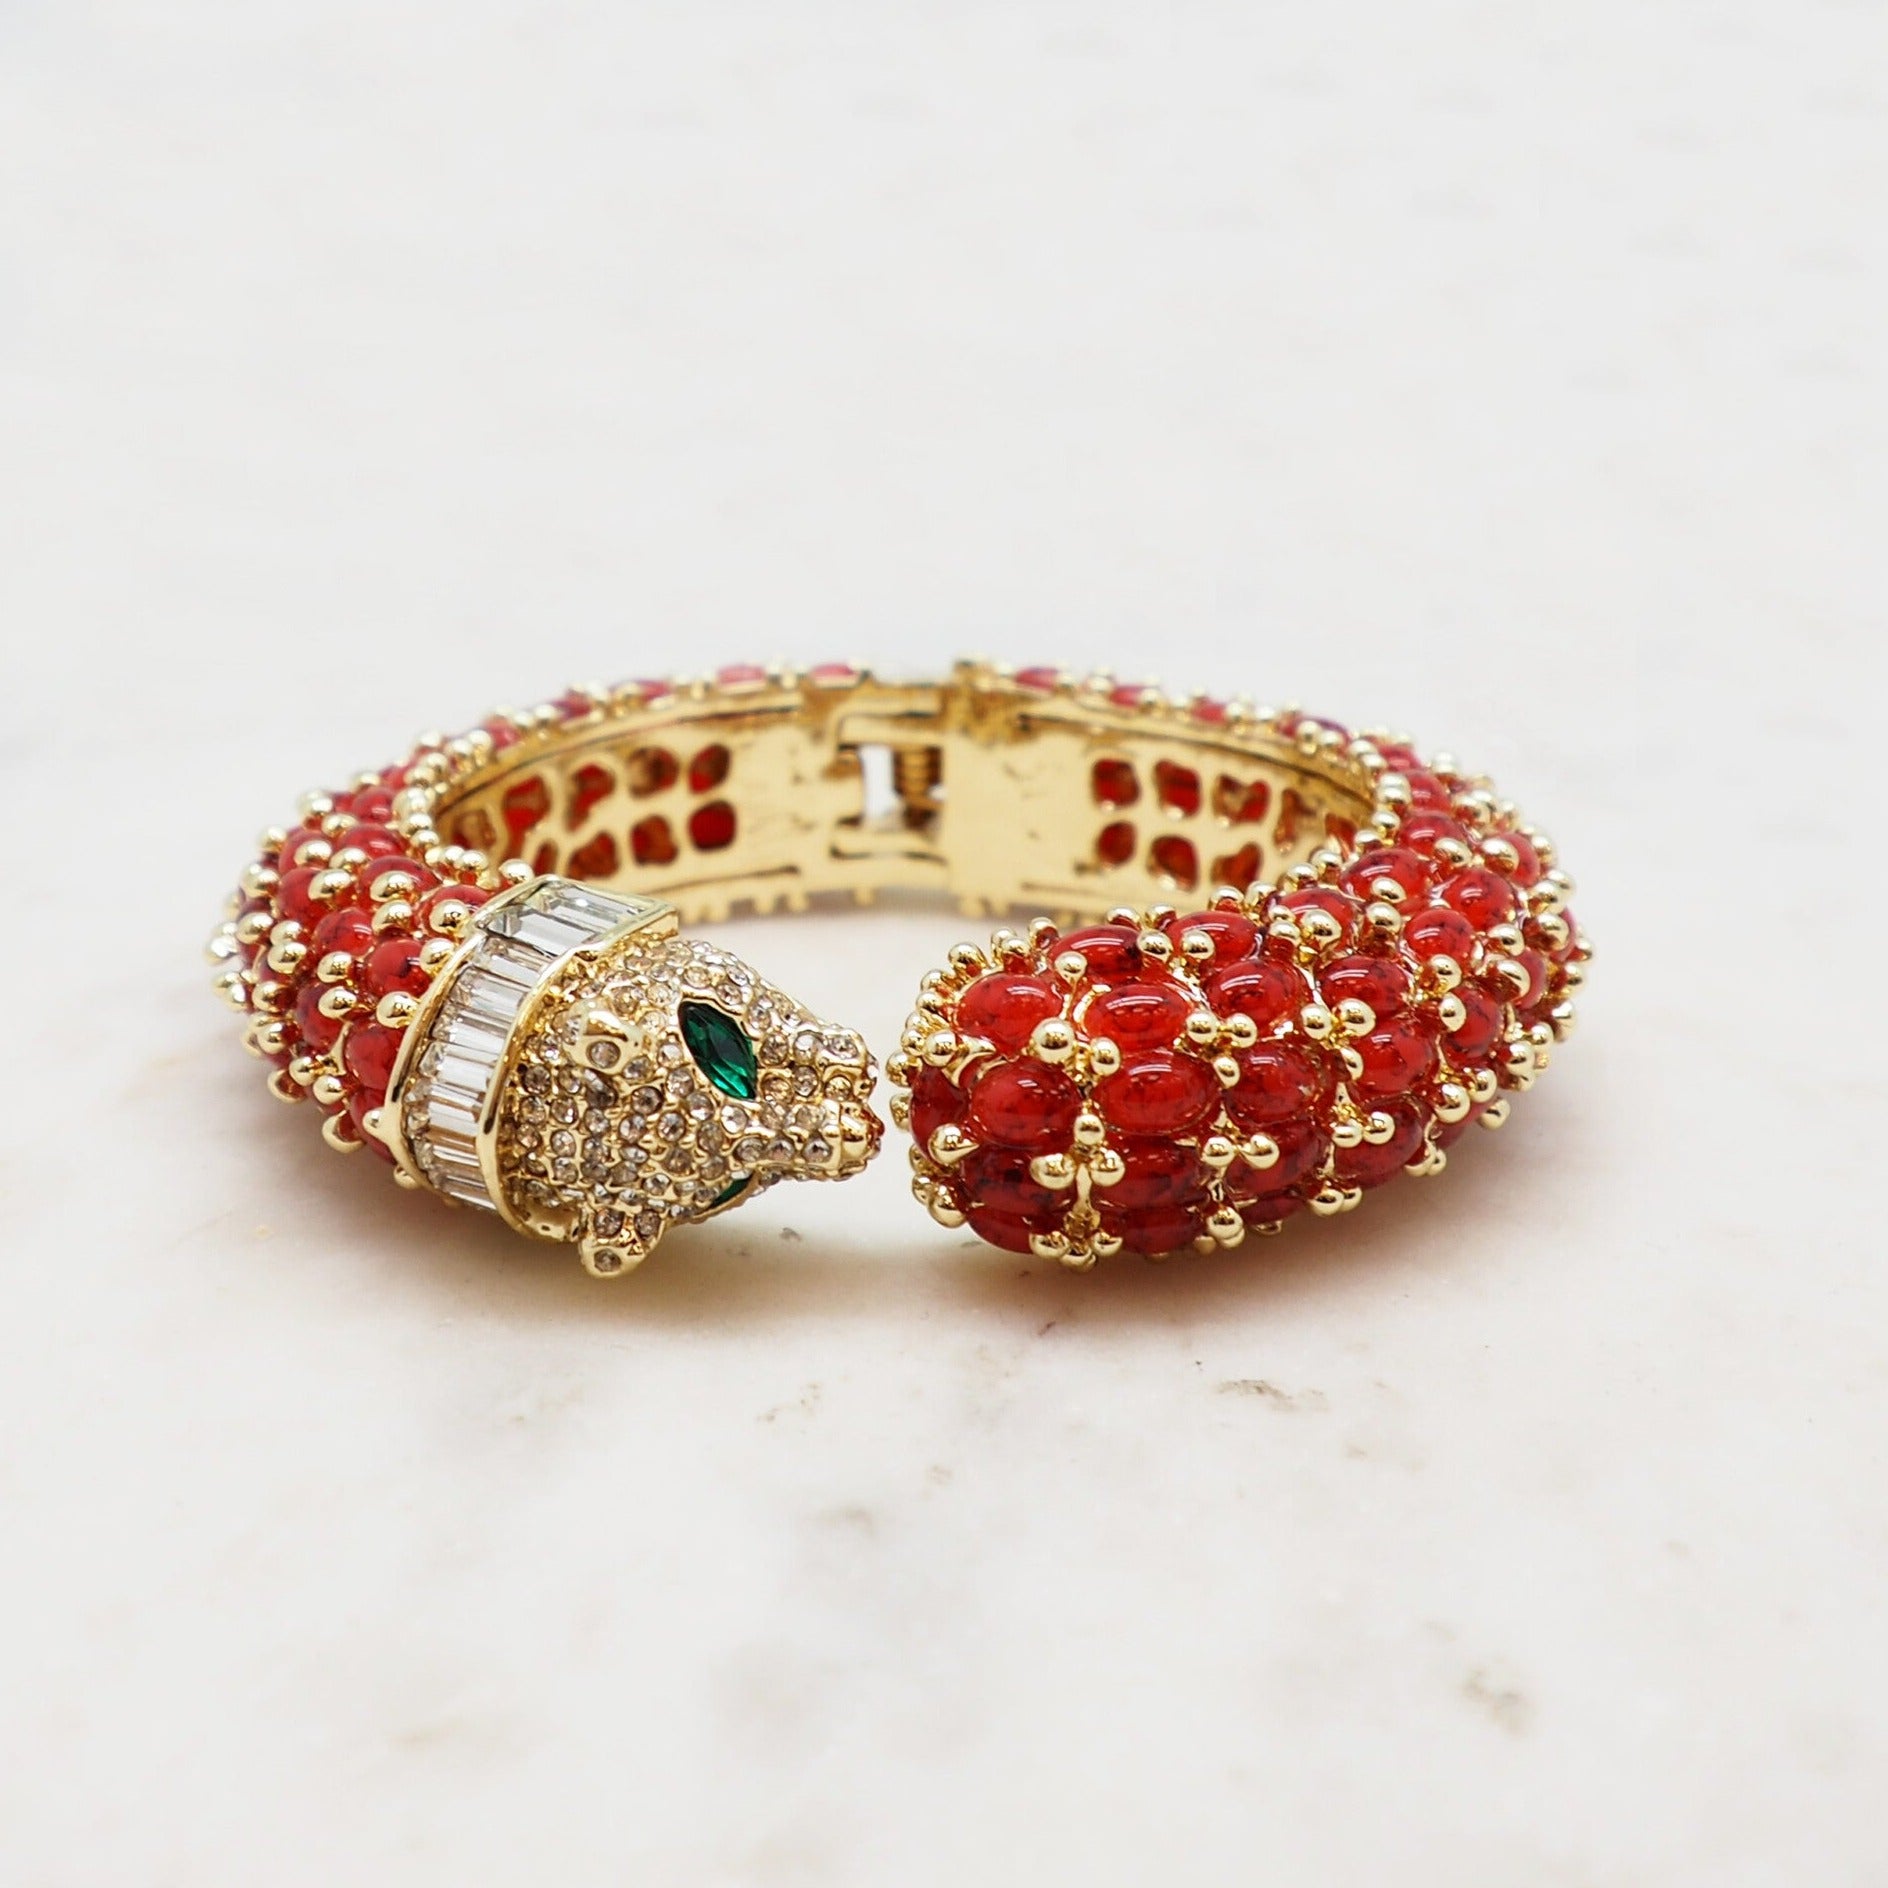 The Tiger Bangle - Marble Red